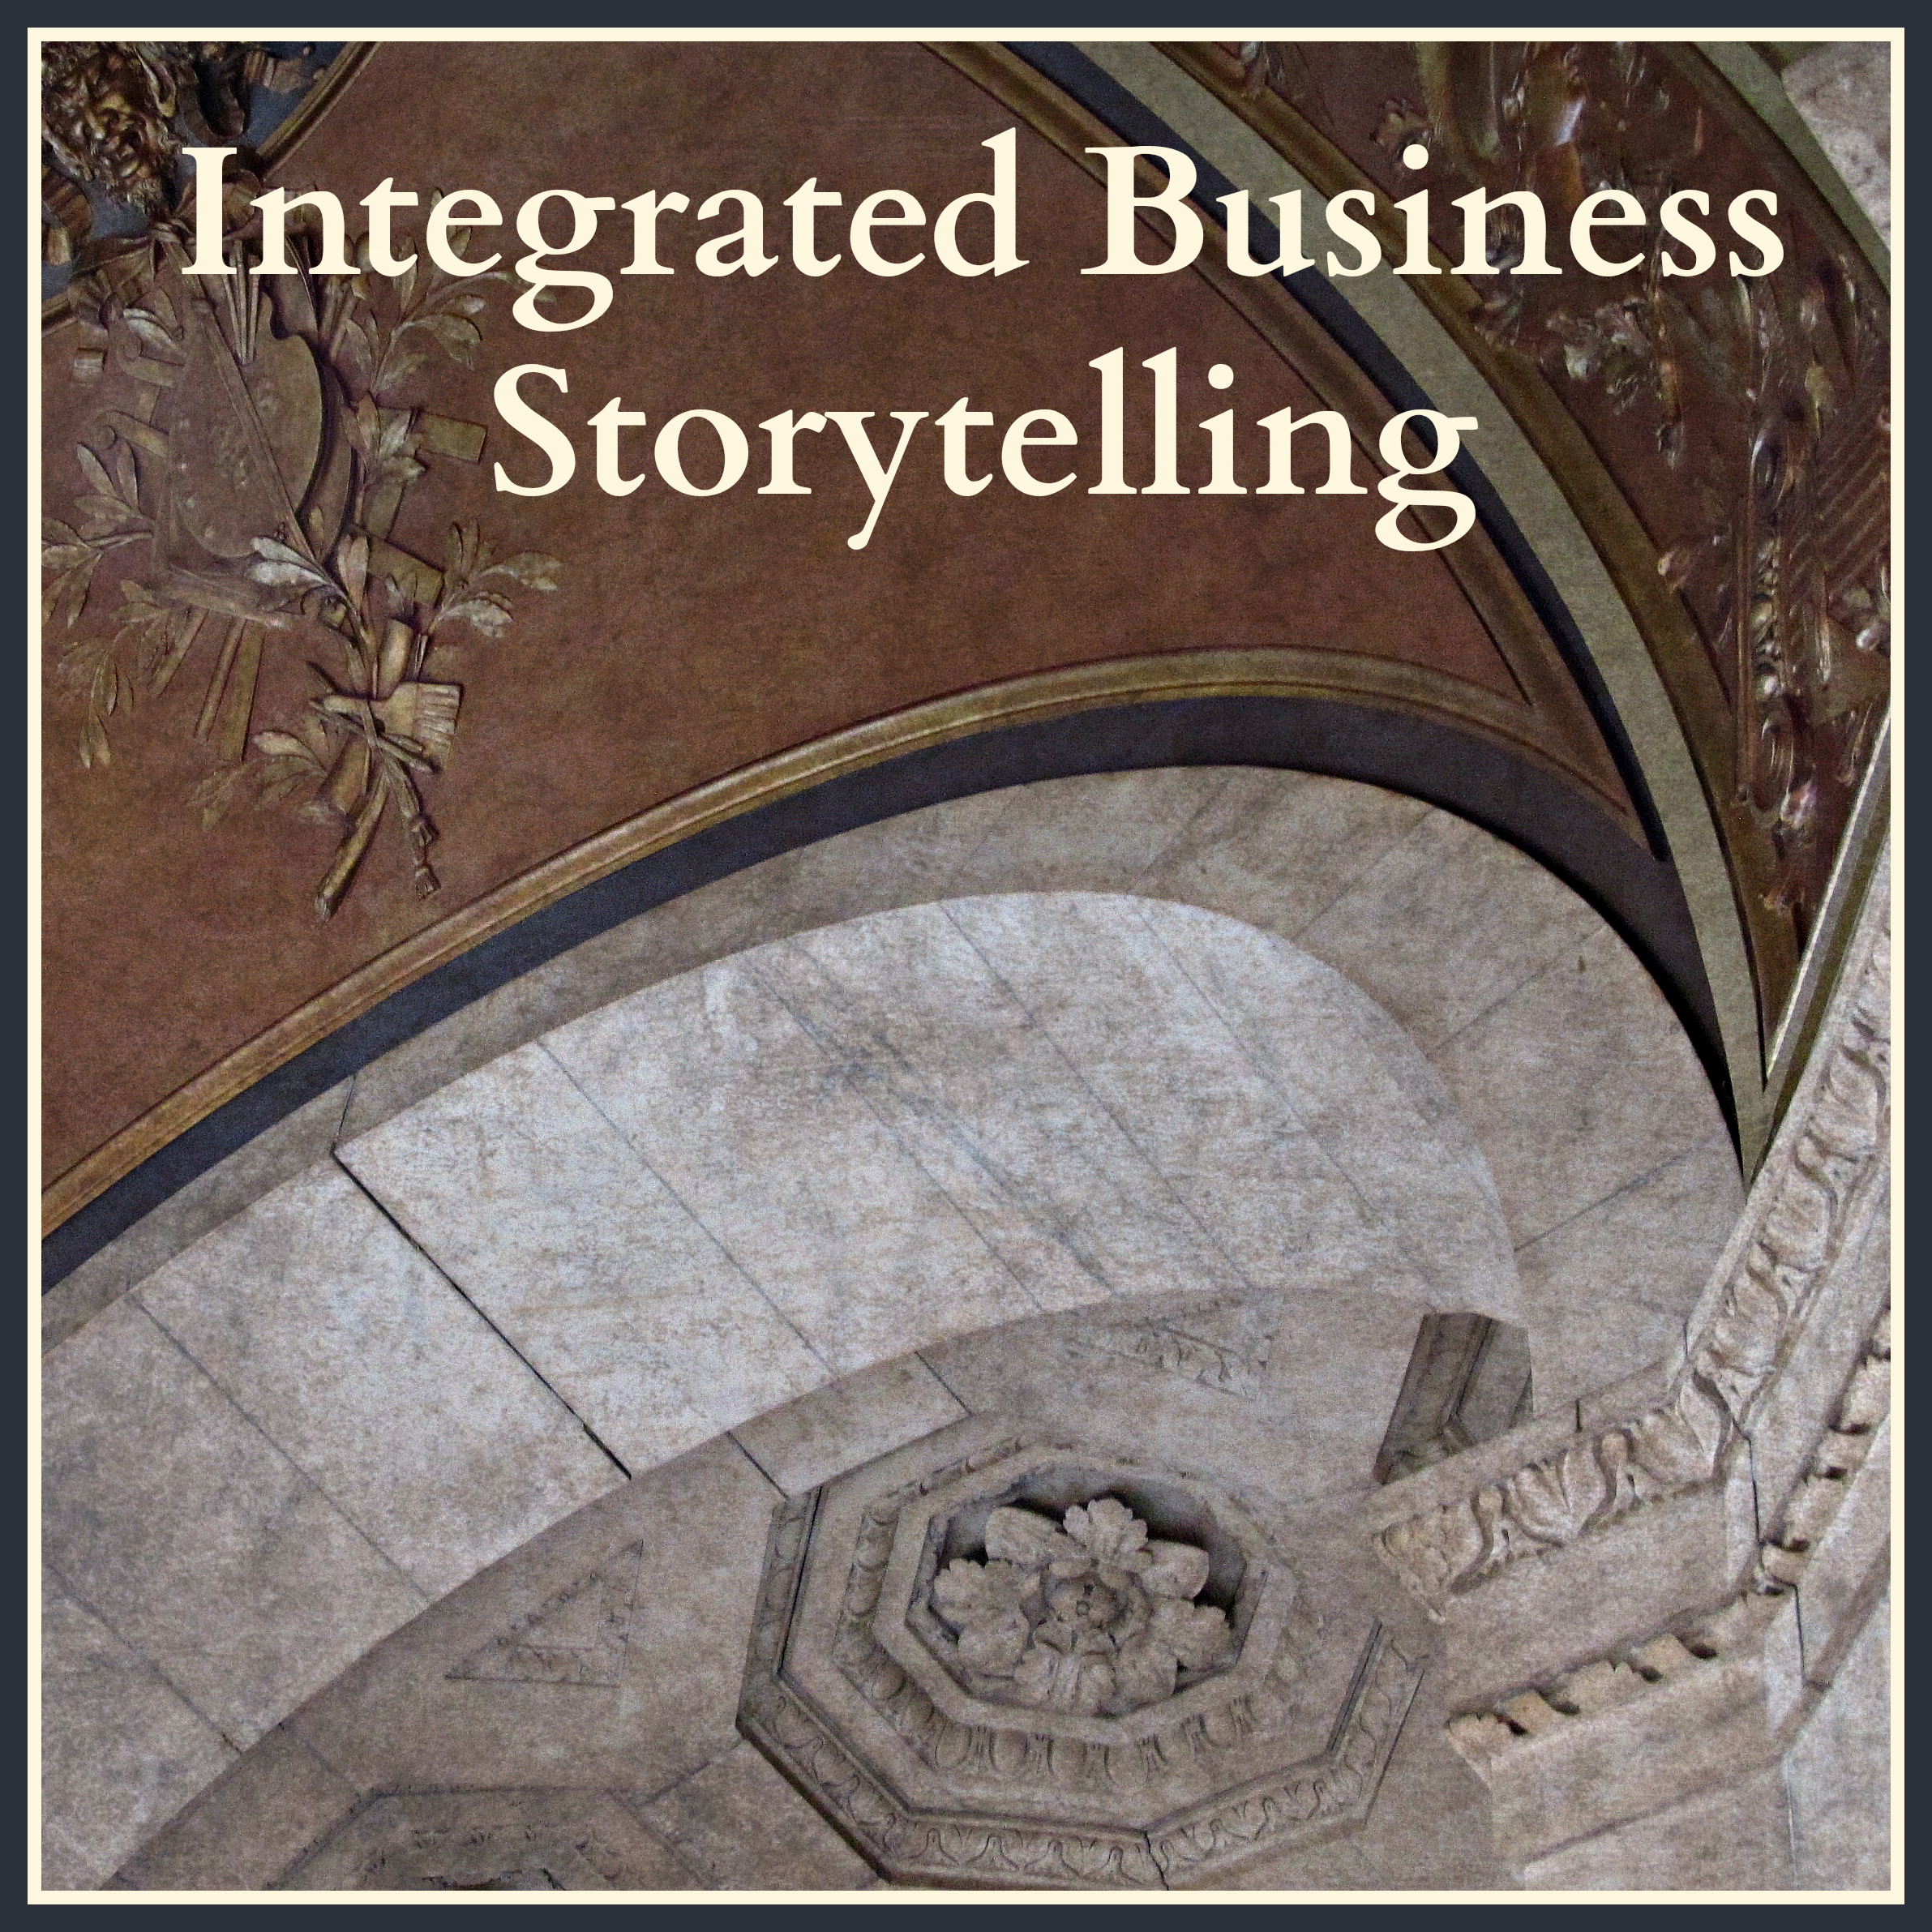 integrated business storytelling by Zette Harbour